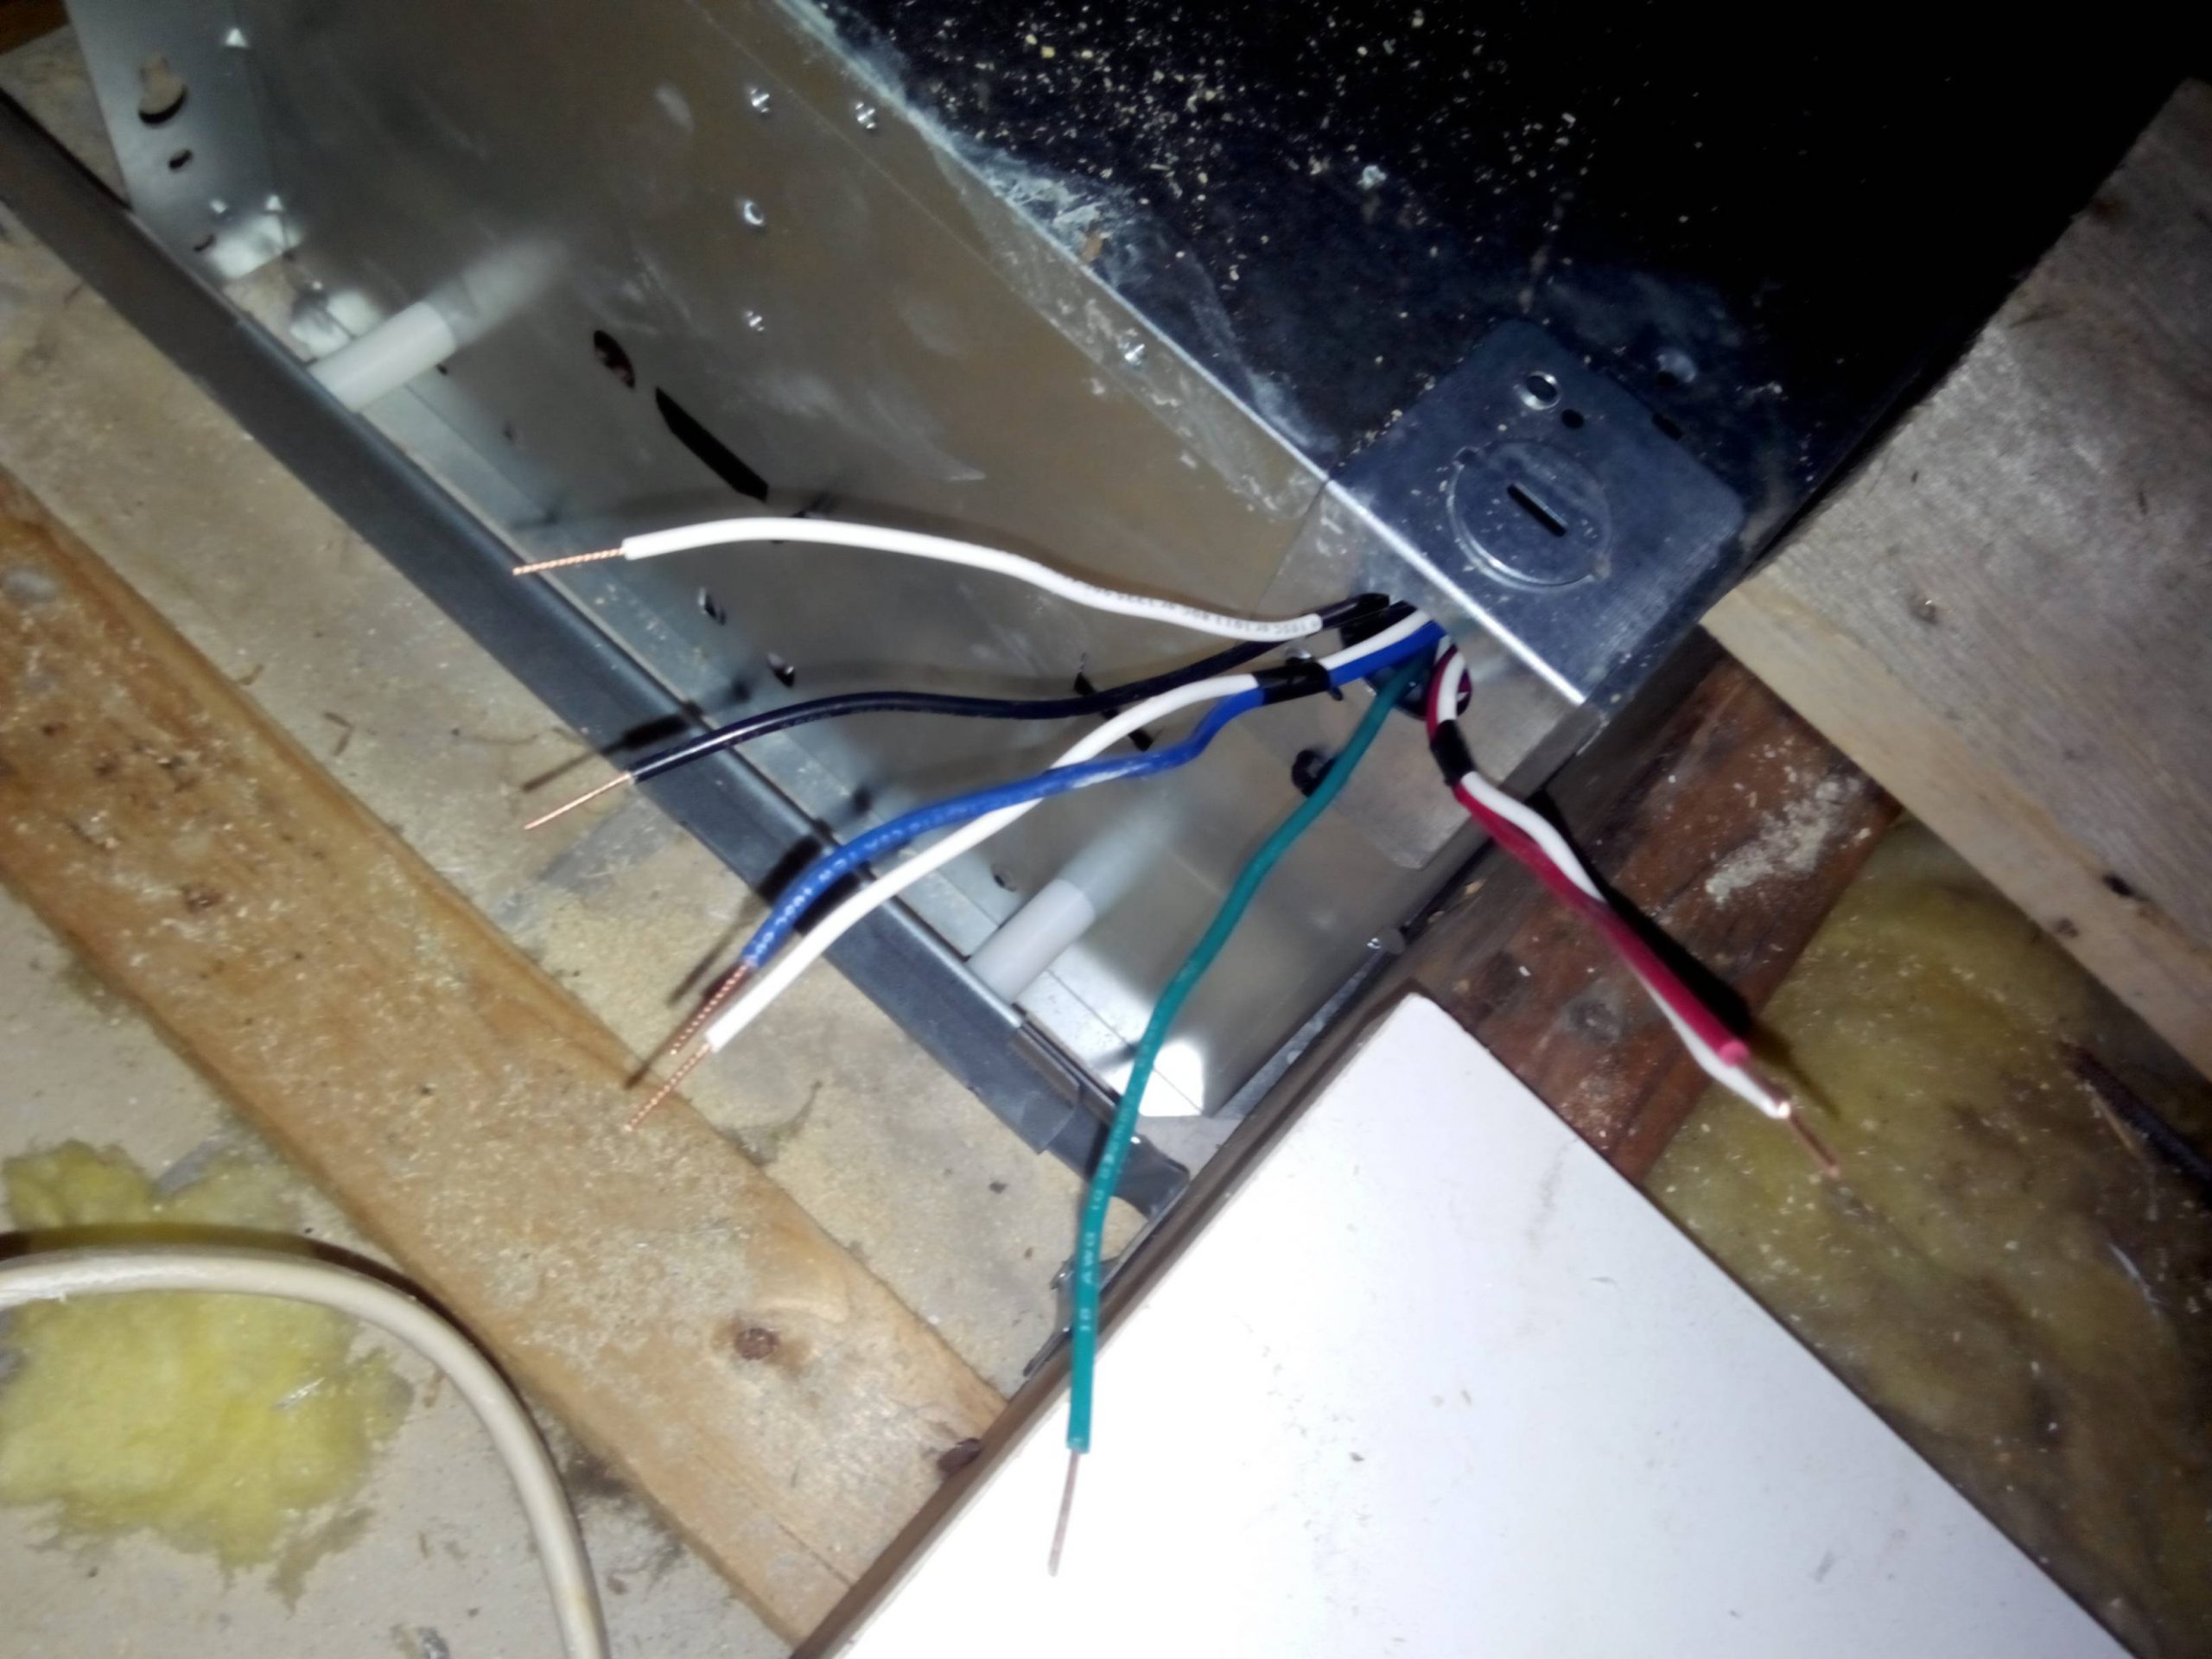 Help Wiring Bathroom Fan Home Improvement Stack Exchange within proportions 3264 X 2448